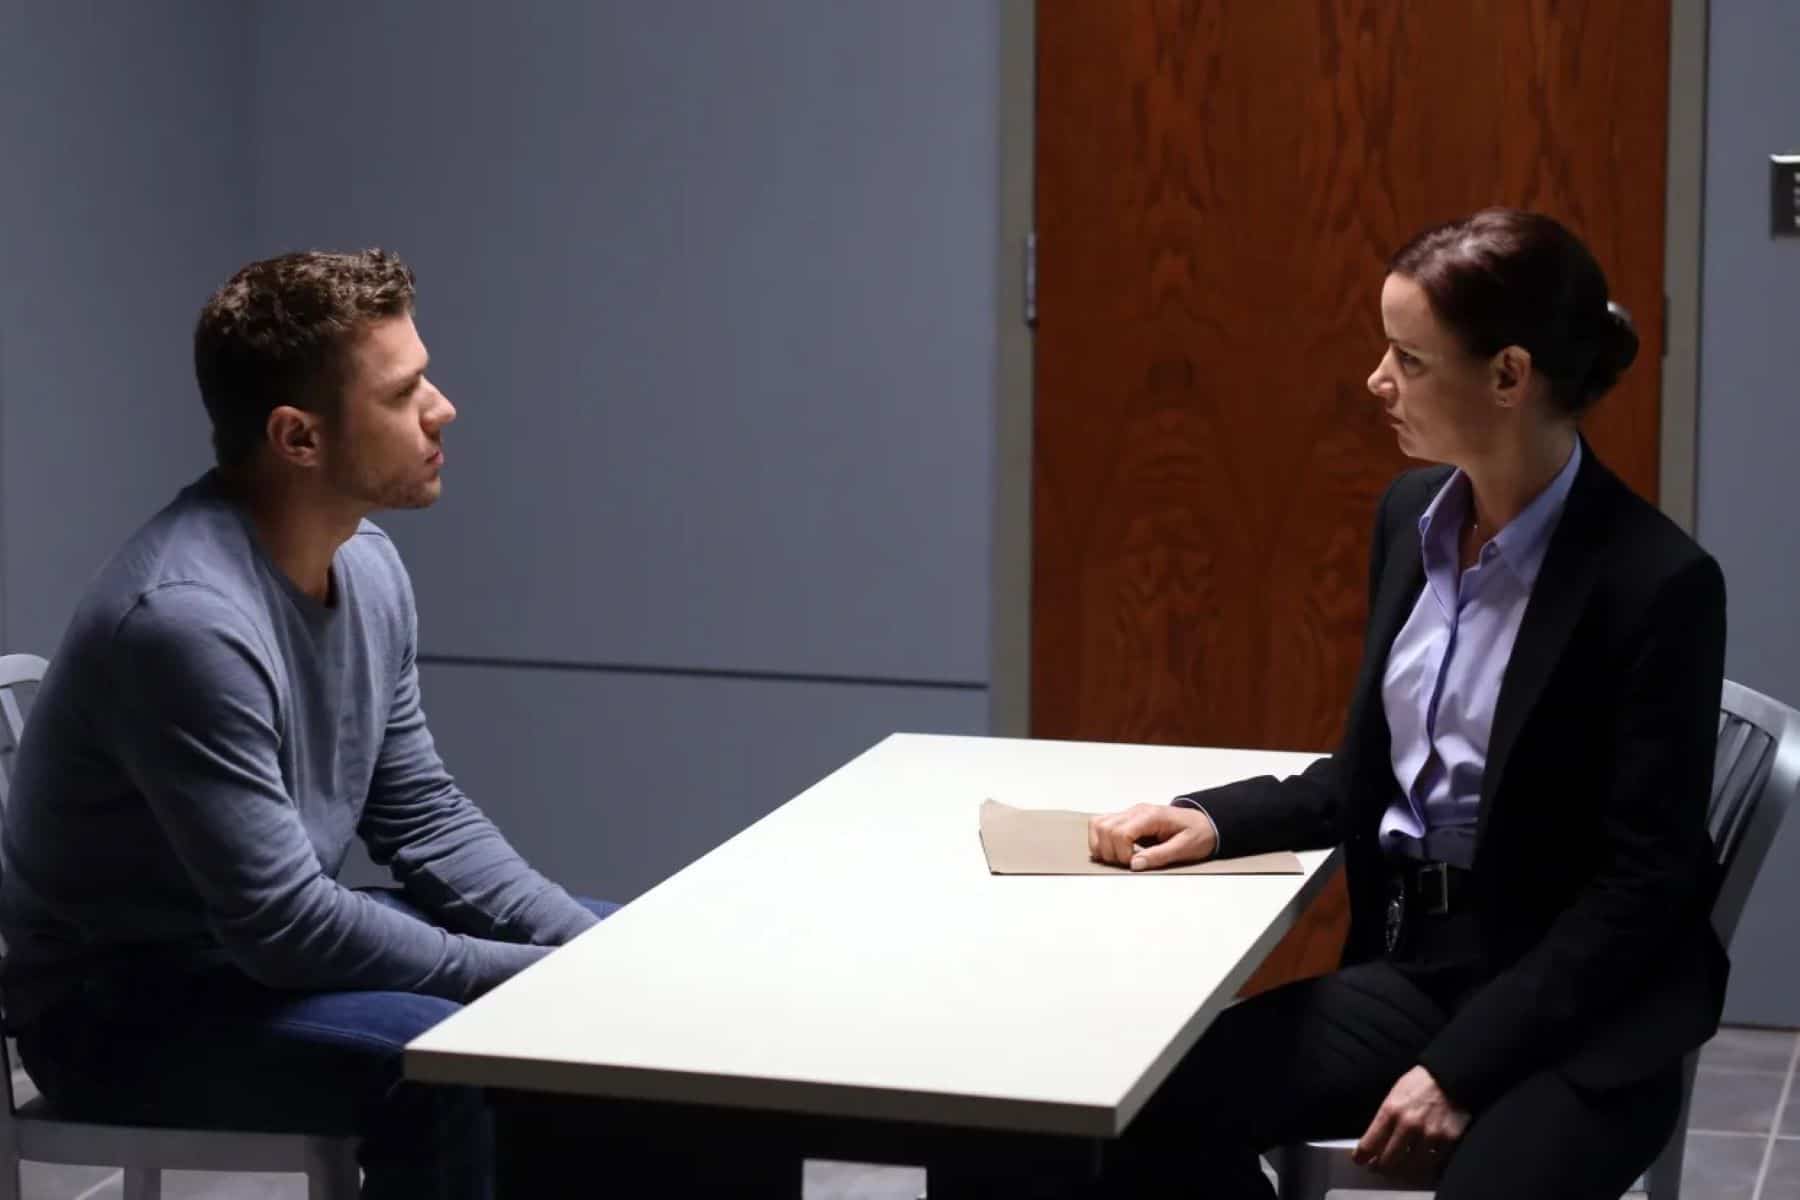 A female detective sits across from a male suspect in a police interrogation room in this image from ABC Studios.